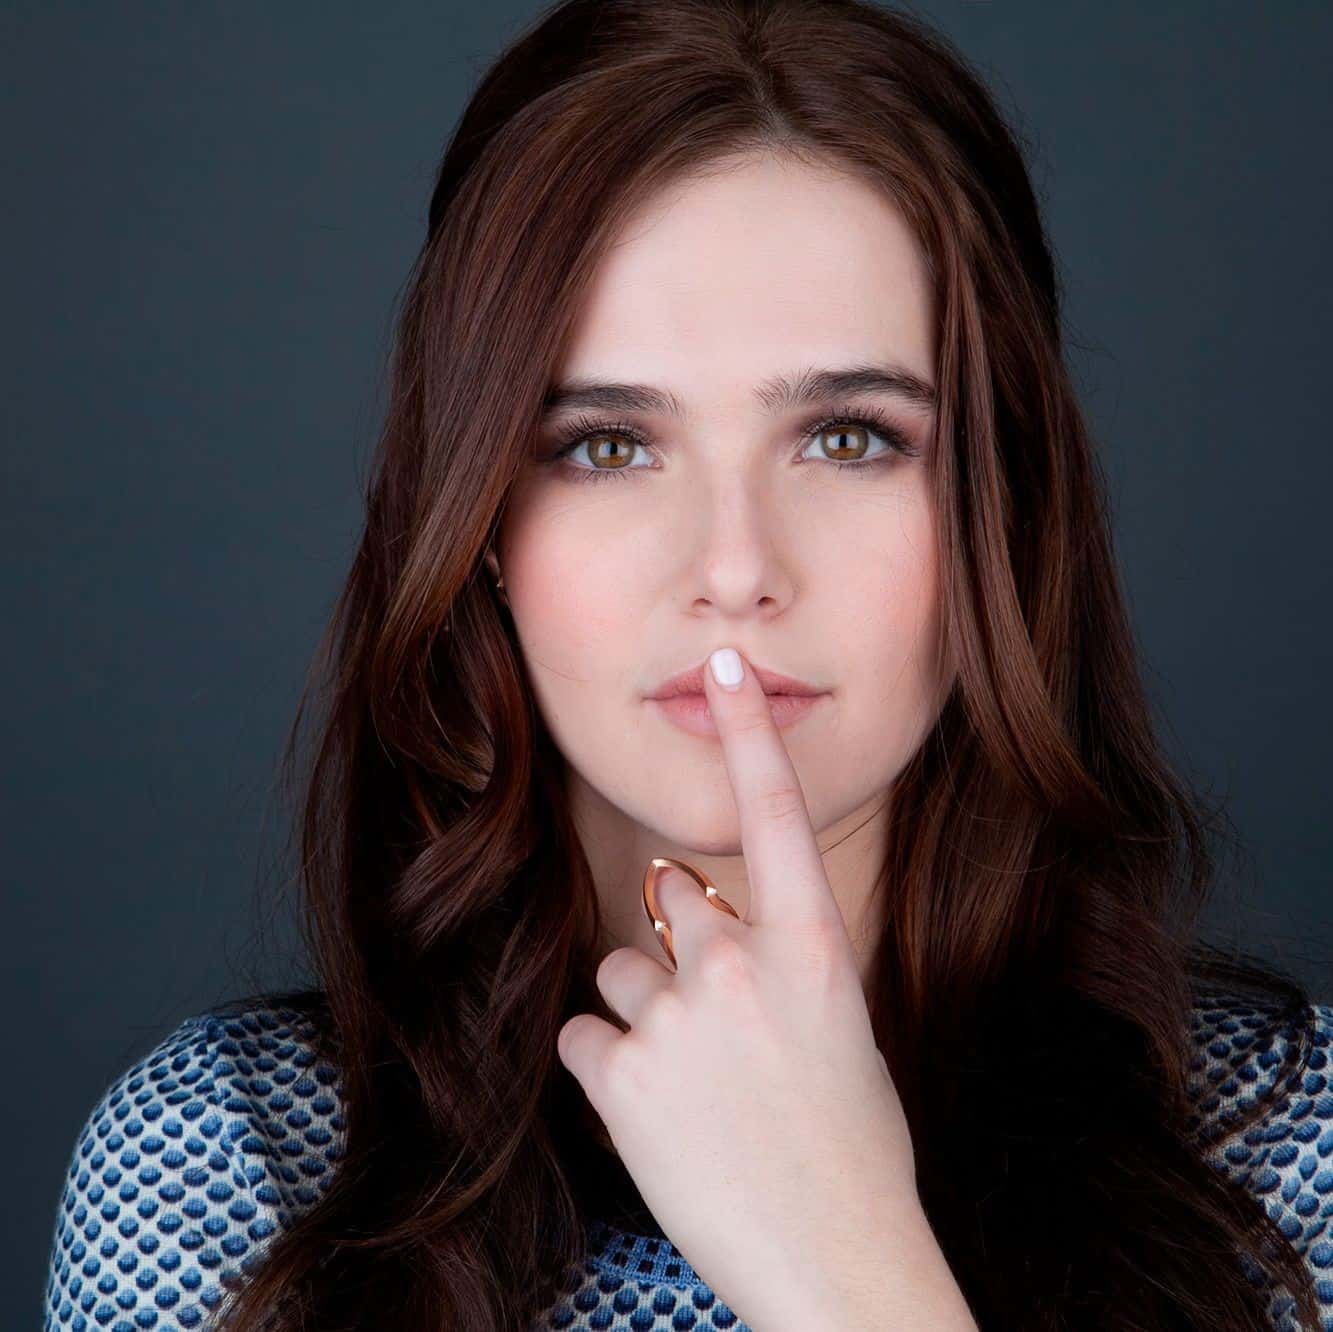 Famous Hollywood singers, Hollywood actress, Hollywood models, Hollywood singers, How old is Zoey Deutch, Most popular actress in America, top hollywood actress, Zoey Deutch, Zoey Deutch accident, Zoey Deutch age, Zoey Deutch Awards, Zoey Deutch bikini pics, Zoey Deutch Biography, Zoey Deutch bra size, Zoey Deutch breast size, Zoey Deutch Carrier, Zoey Deutch children, Zoey Deutch cup size, Zoey Deutch Daughter, Zoey Deutch dress size, Zoey Deutch Early life, Zoey Deutch eyes color, Zoey Deutch favorite perfume, Zoey Deutch feet size, Zoey Deutch full-body measurements, Zoey Deutch hair, Zoey Deutch height, Zoey Deutch hobbies, Zoey Deutch hot, Zoey Deutch hot images, Zoey Deutch husband, Zoey Deutch illness, Zoey Deutch Instagram, Zoey Deutch measurements, Zoey Deutch movies list, Zoey Deutch net worth, Zoey Deutch Oscars, Zoey Deutch personal info, Zoey Deutch shoe size, Zoey Deutch social media, Zoey Deutch twitter, Zoey Deutch upcoming movies, Zoey Deutch wallpaper, Zoey Deutch weight, Zoey Deutch Young